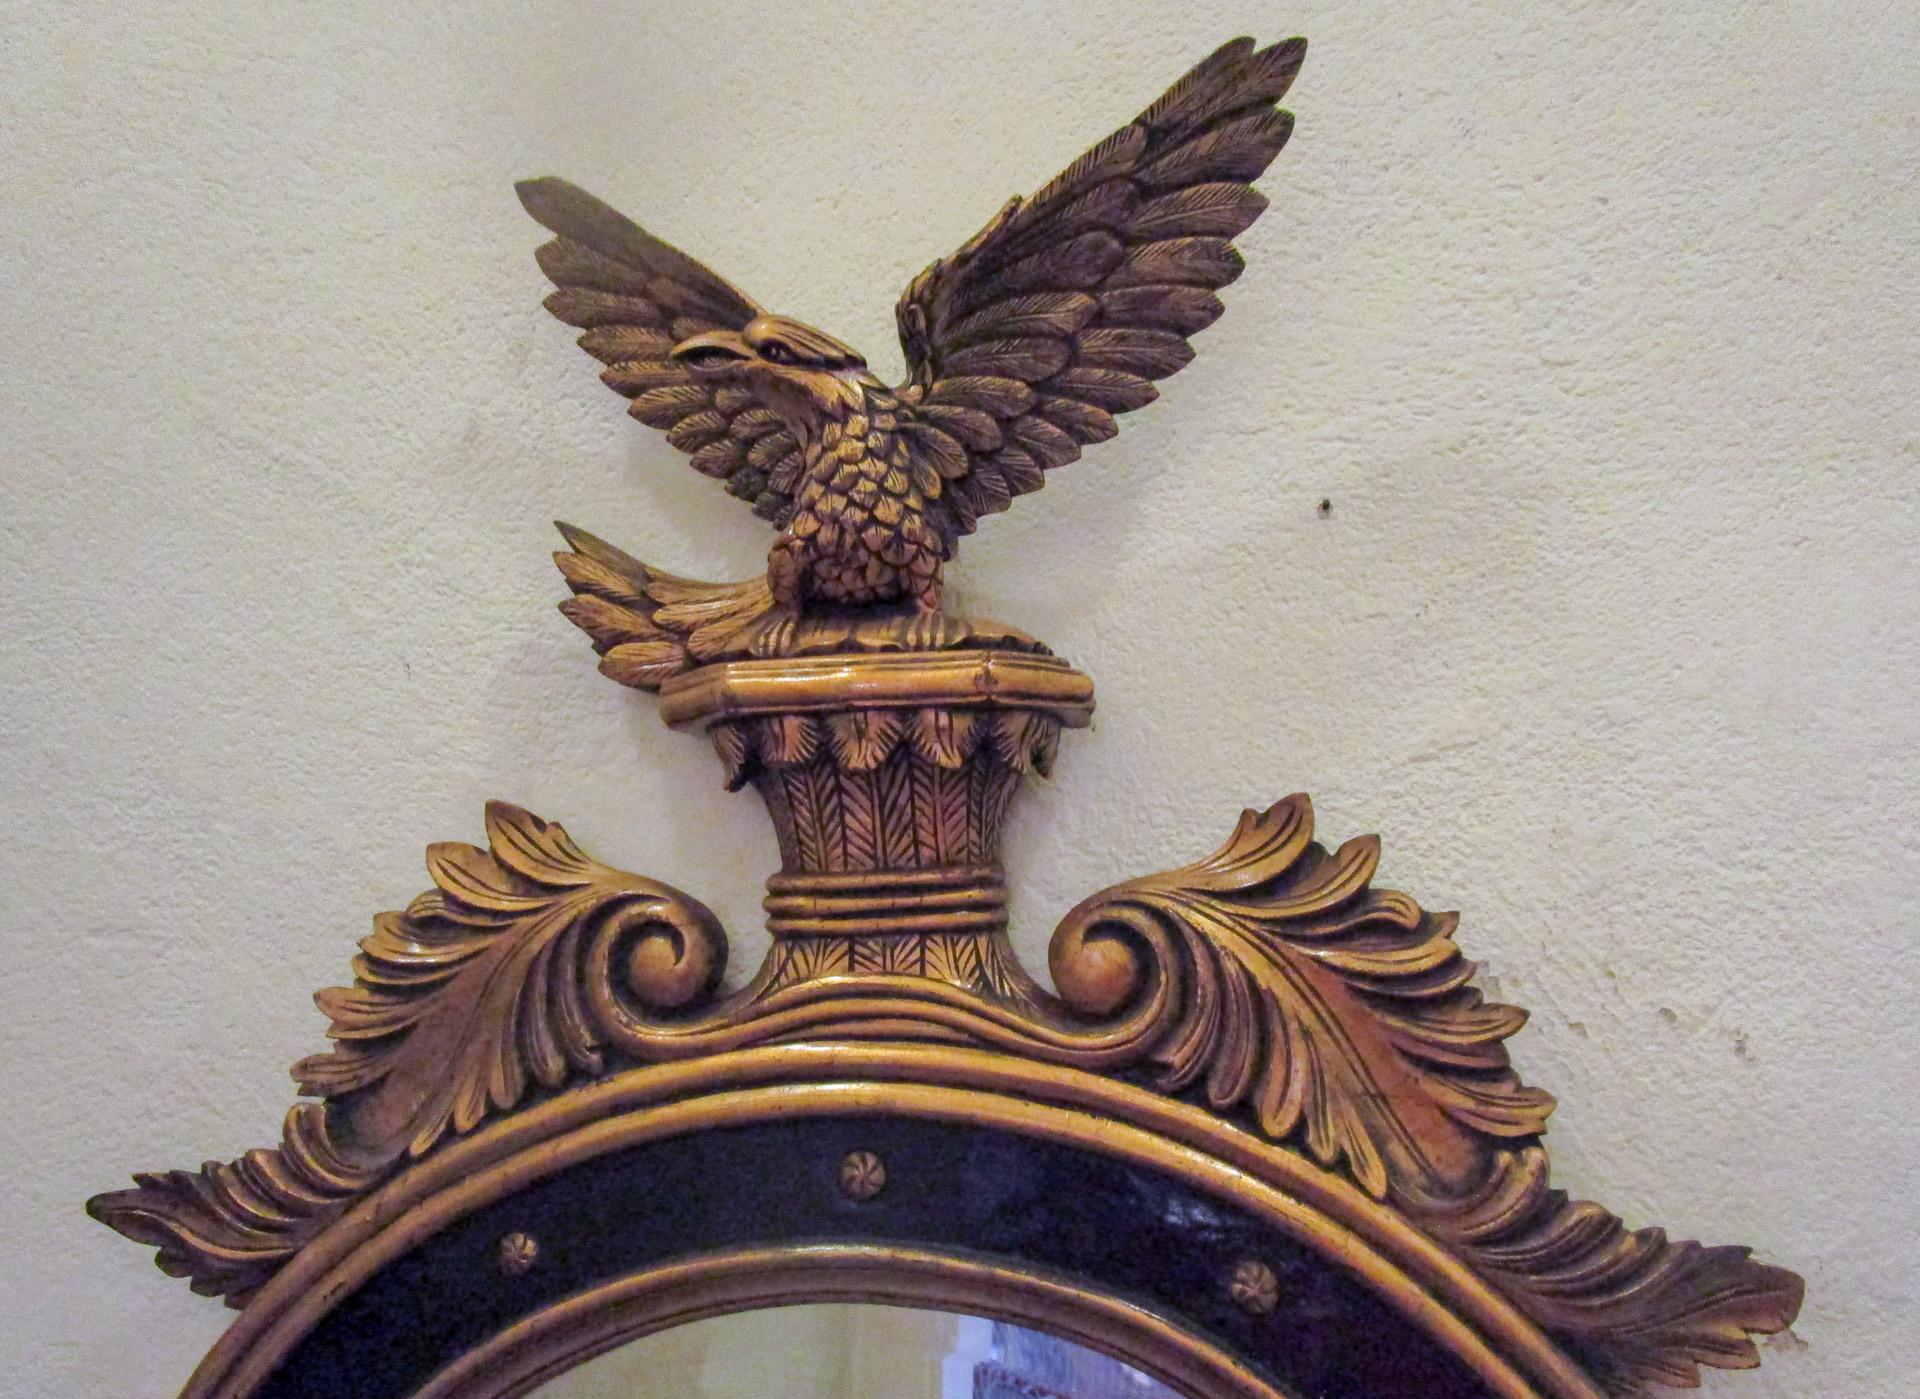 This classic Federal style American giltwood mirror is finely carved and 
features an eagle with widely spread wings perched on a pedestal atop. Sheaves of wheat and elegant acanthus scrolled foliage, both symbols of immortality, grace the body of